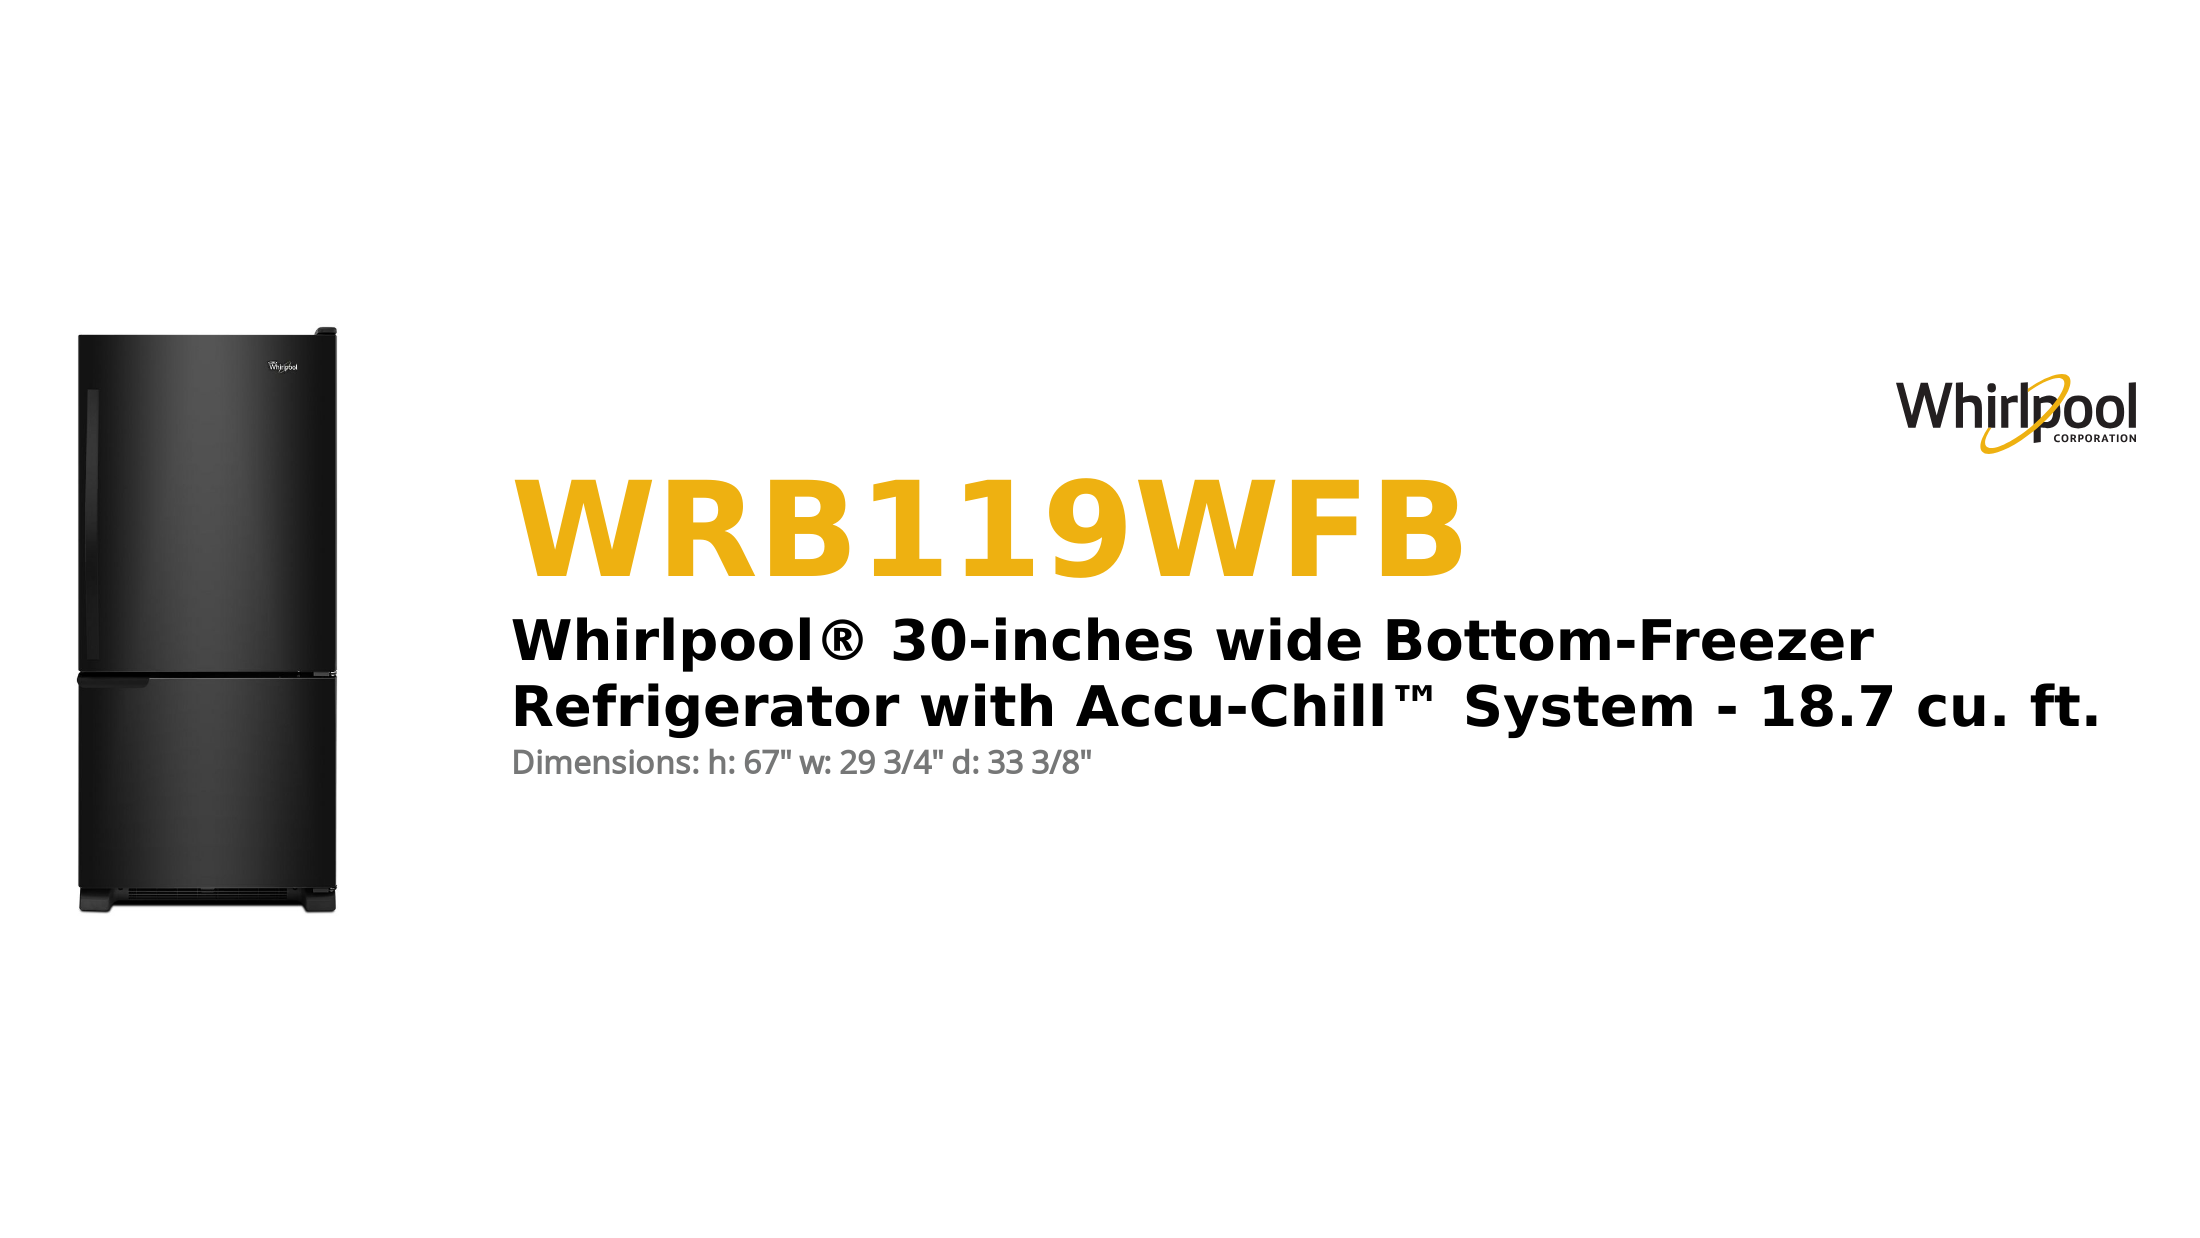 Whirlpool® 30-inches wide Bottom-Freezer Refrigerator with Accu-Chill™ System - 18.7 cu. ft.